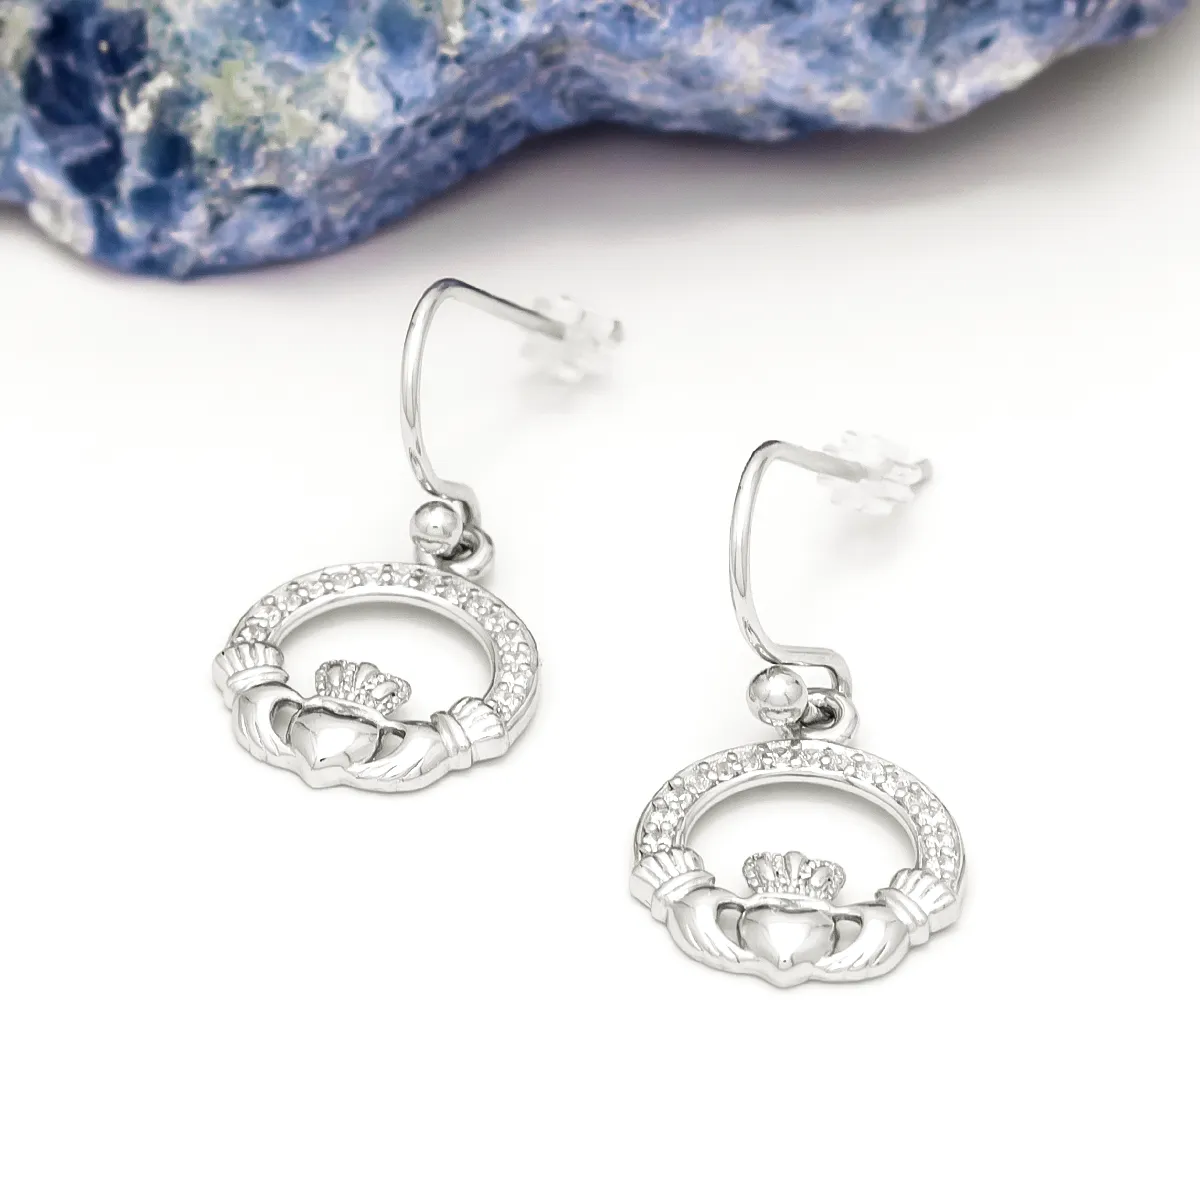 Silver Claddagh Earrings with Cubic Zirconia